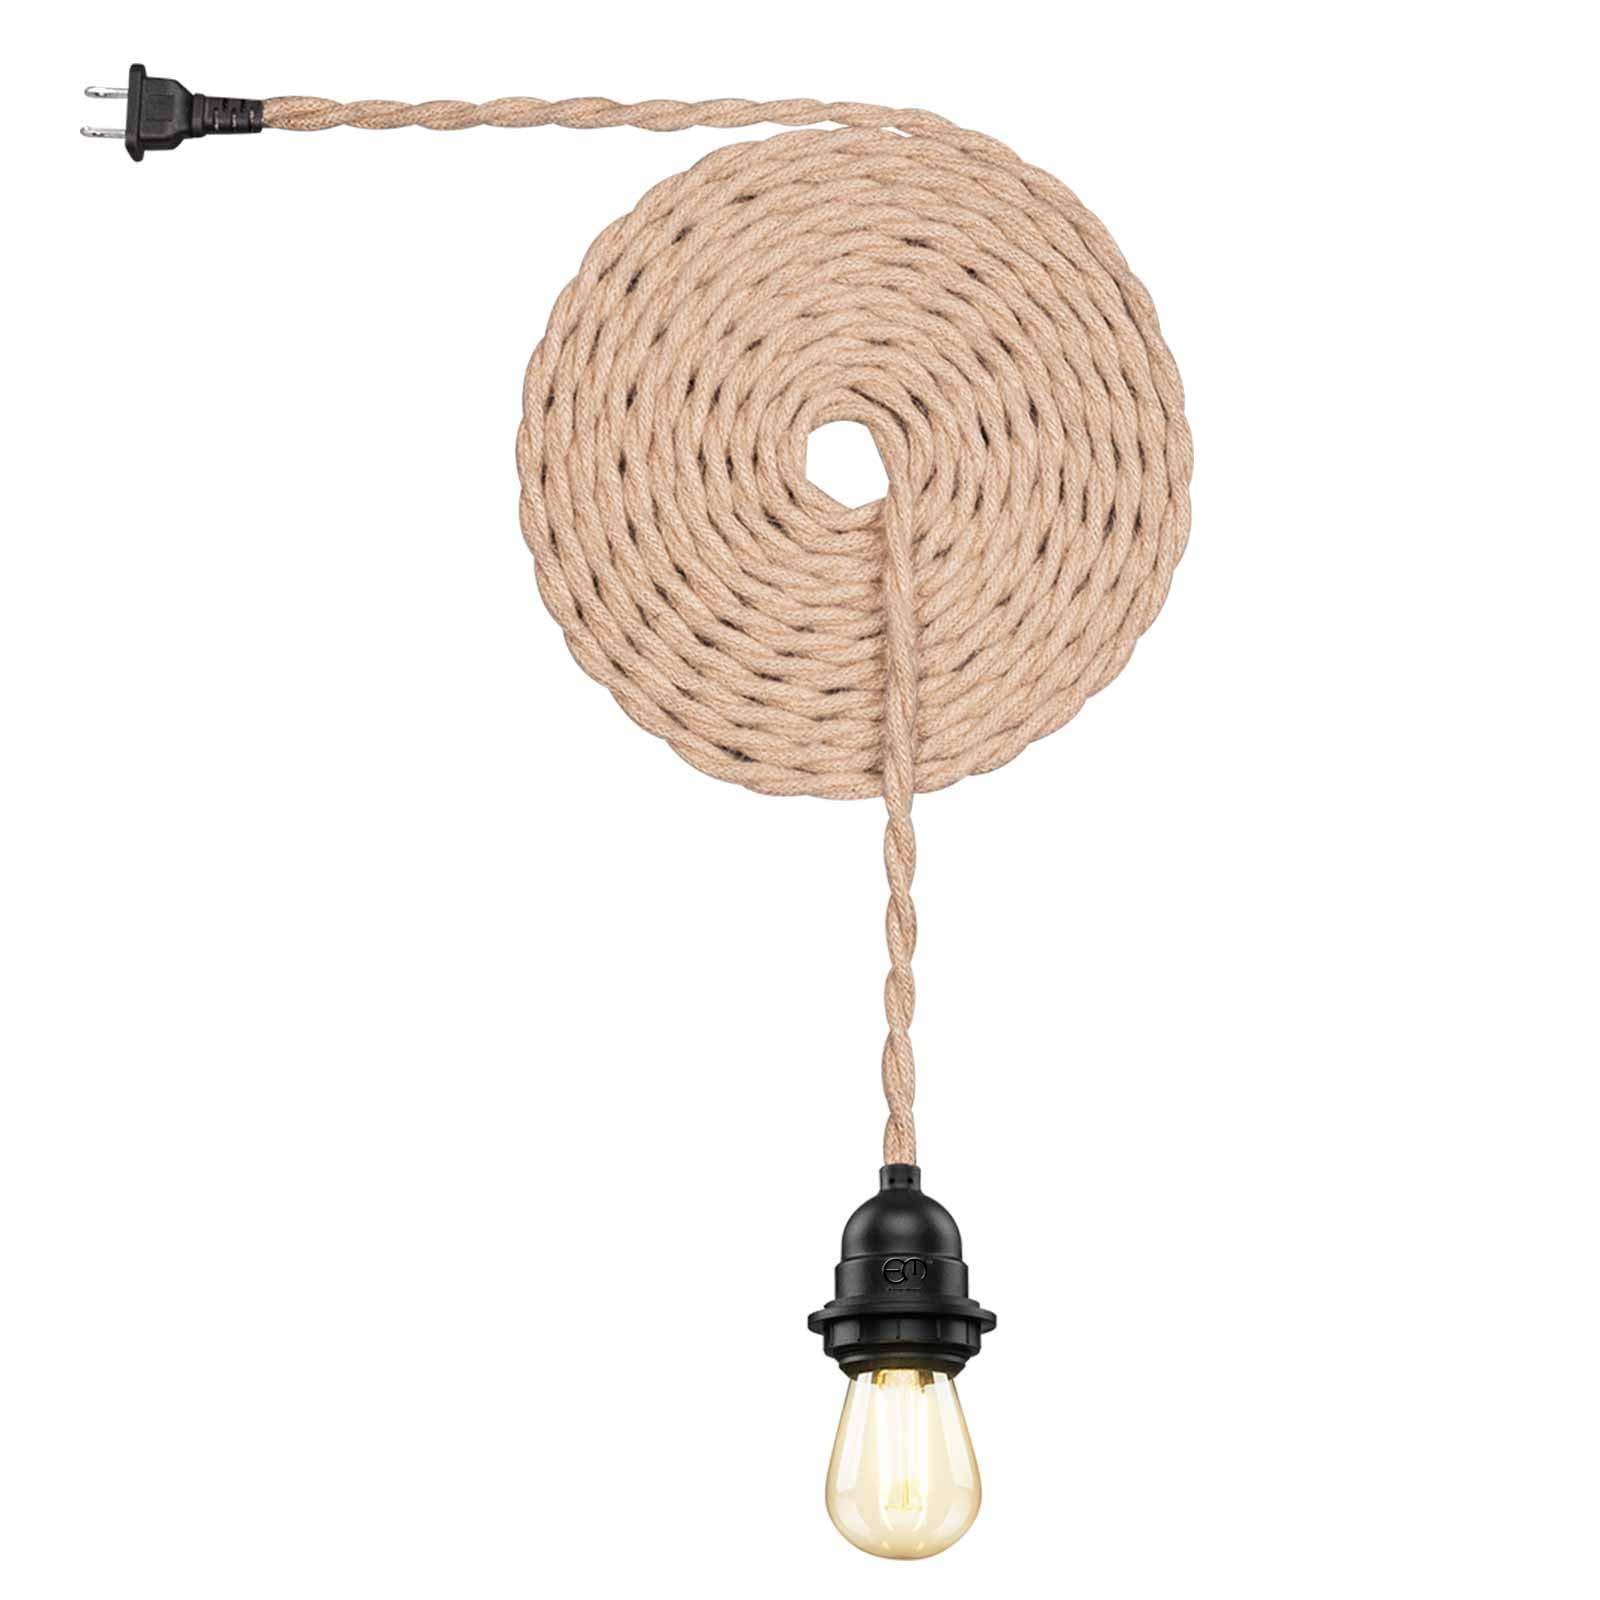 Vintage Waterproof Ceiling Pendant Light Kit with Twisted Hemp Rope Hanging Lighting Cord Fixture 16.6 FT E26 Outdoor Fireproof Chandelier for Industrial DIY Projects Bedroom Bar Backyard Balcony UL